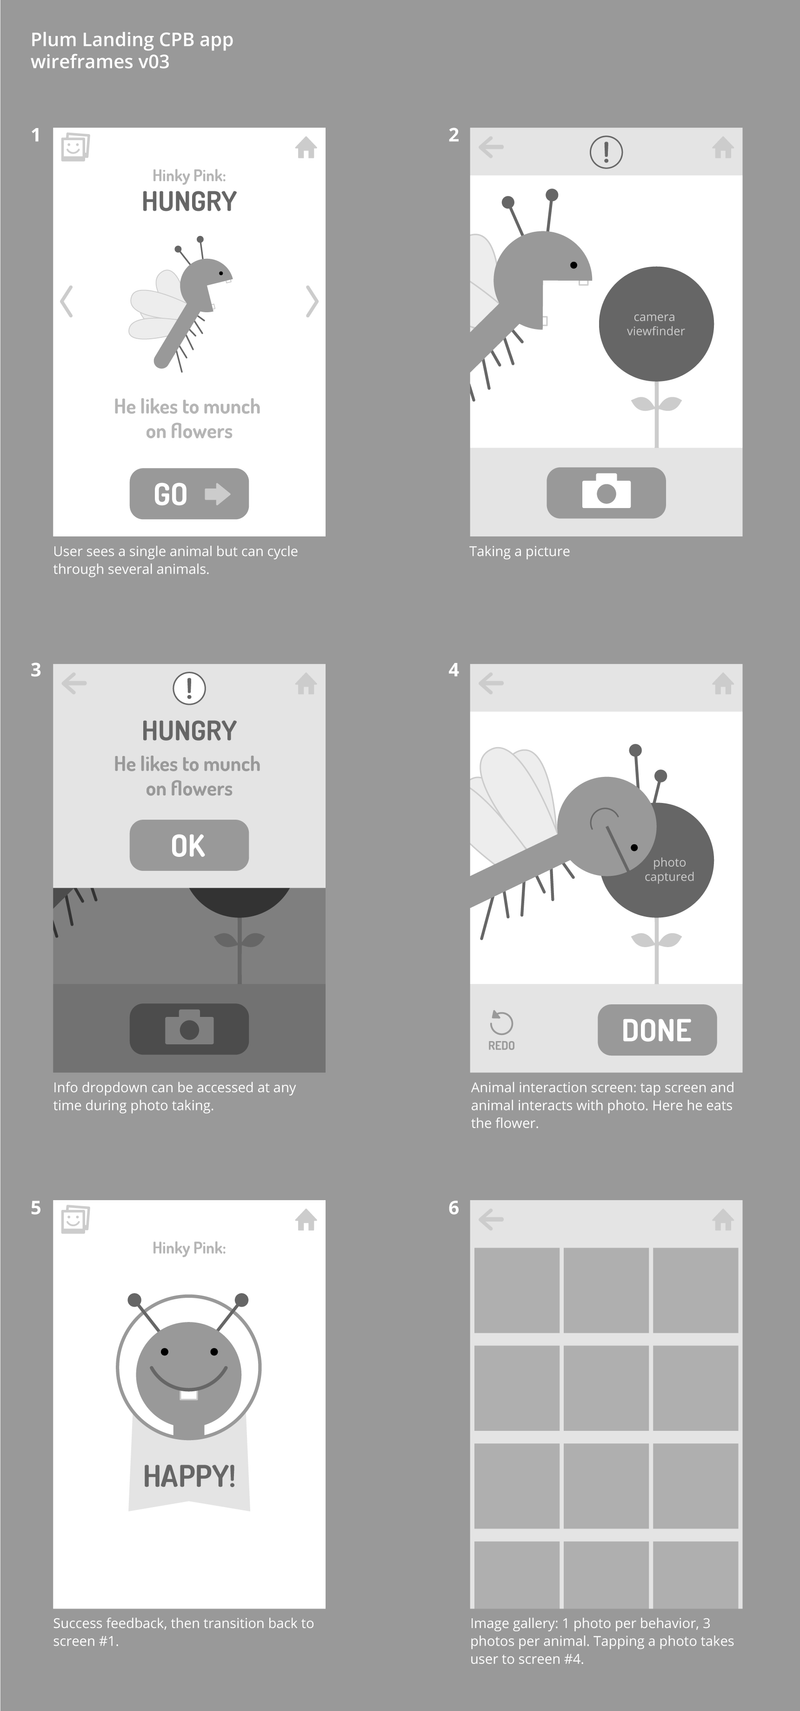 Plum Landing app screen wireframes: user photos and animal diets.